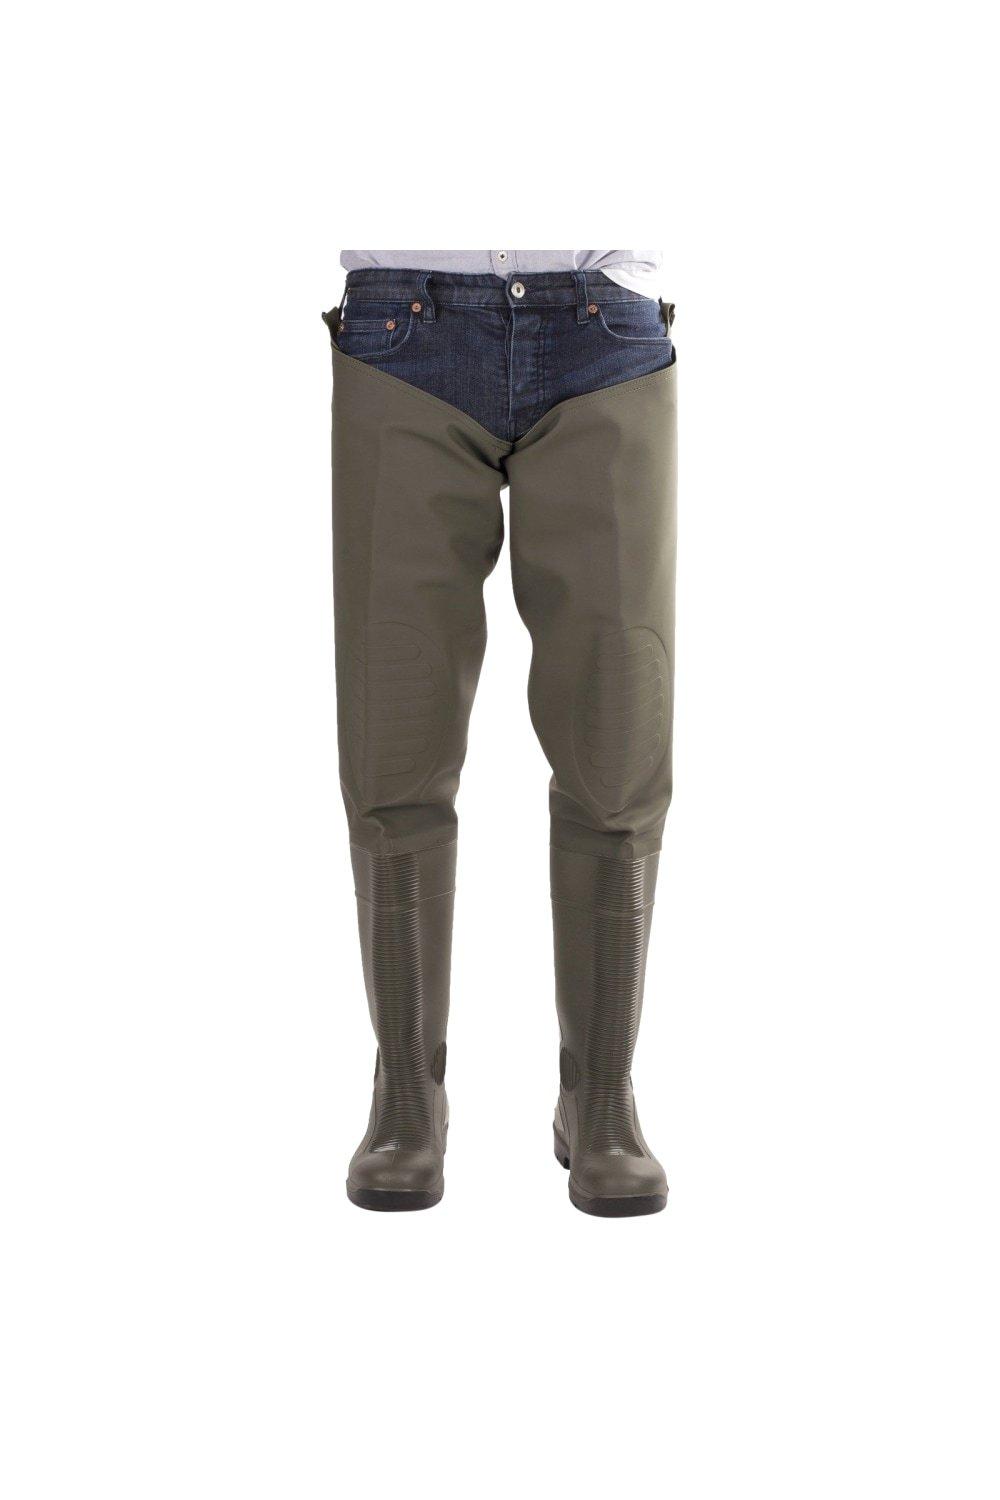 Forth Waterproof Thigh Safety Wader